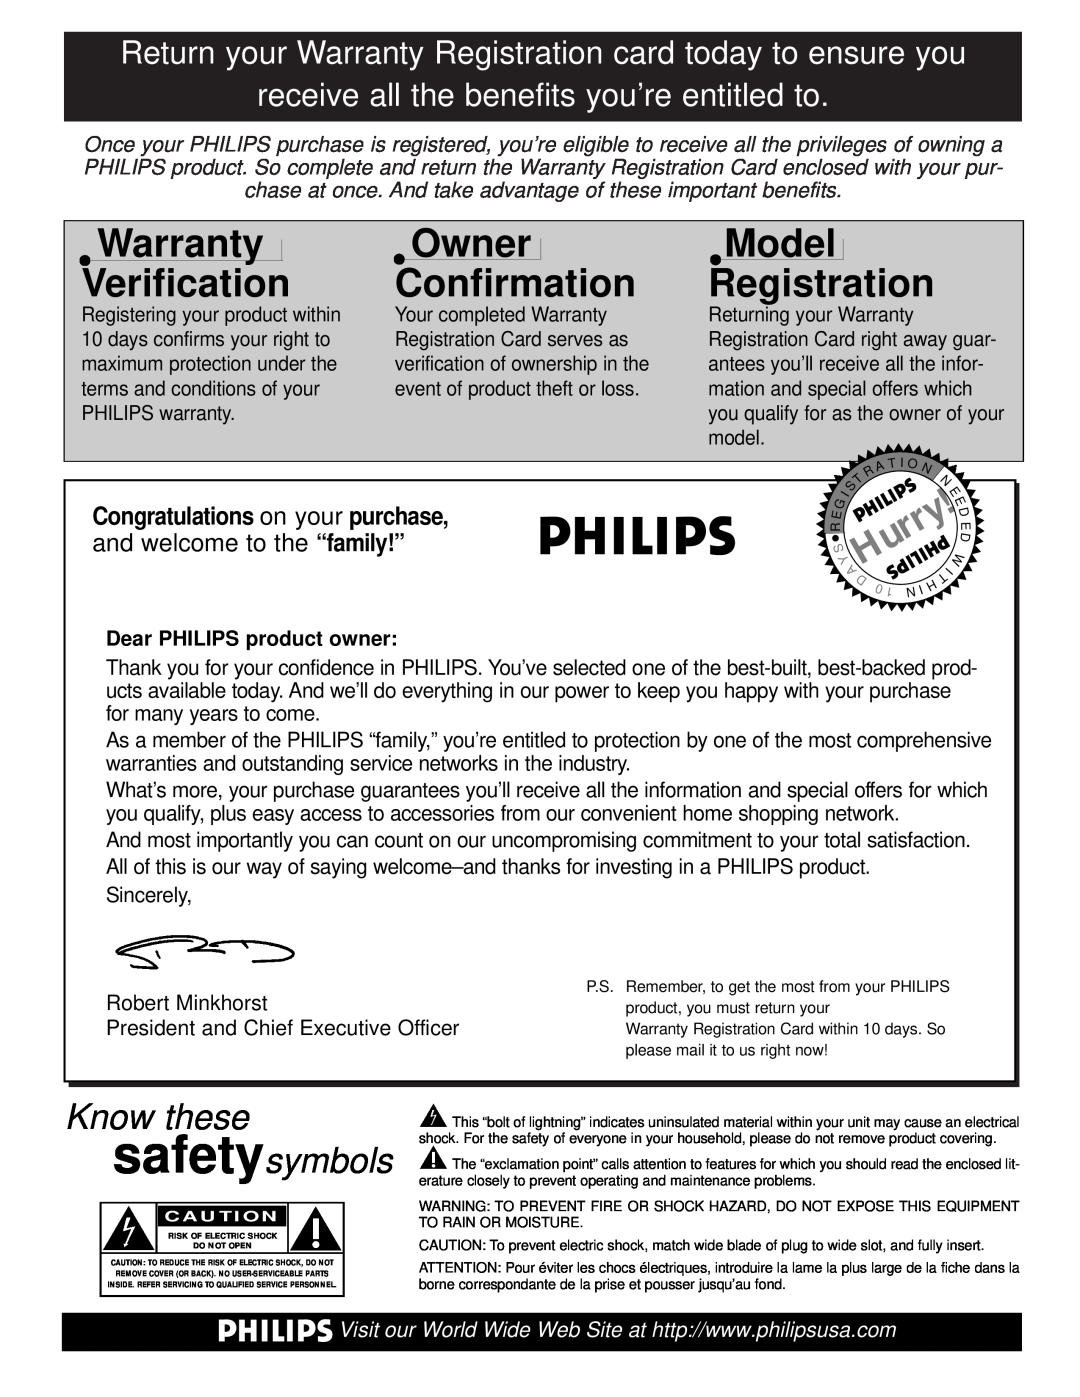 Philips 32PT81S1 Congratulations on your purchase, and welcome to the “family!”, Warranty Verification, Owner Confirmation 